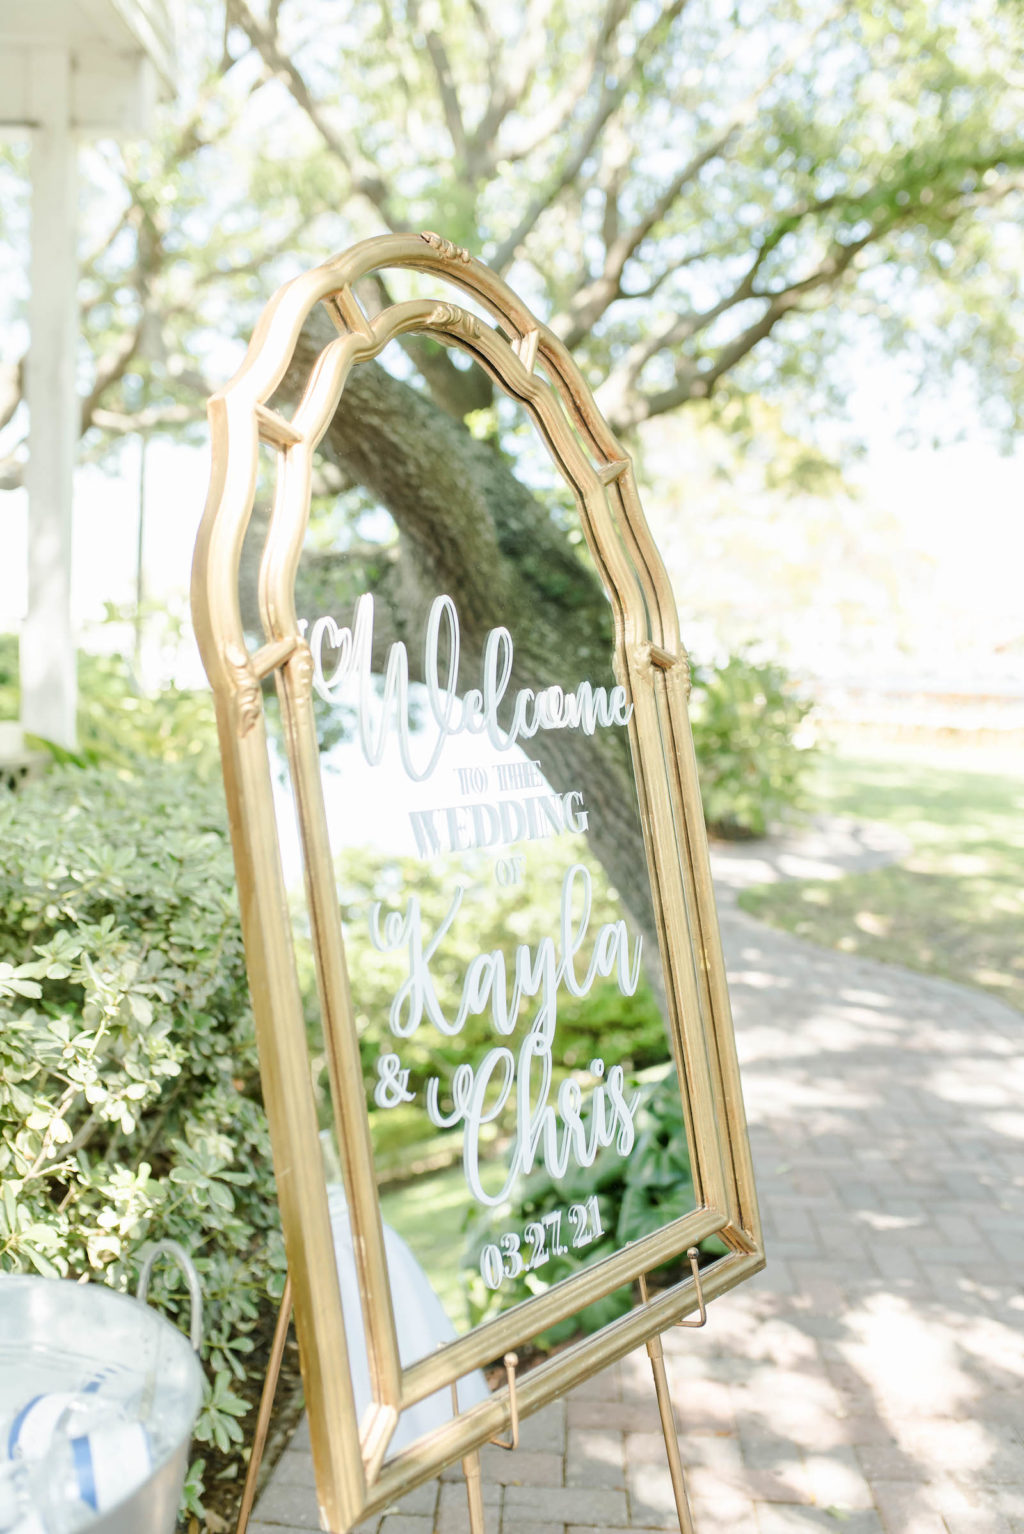 Welcome to Our Wedding Sign | Elegant Gold Décor with White Handwritten Cursive Letters and Mirror Detail